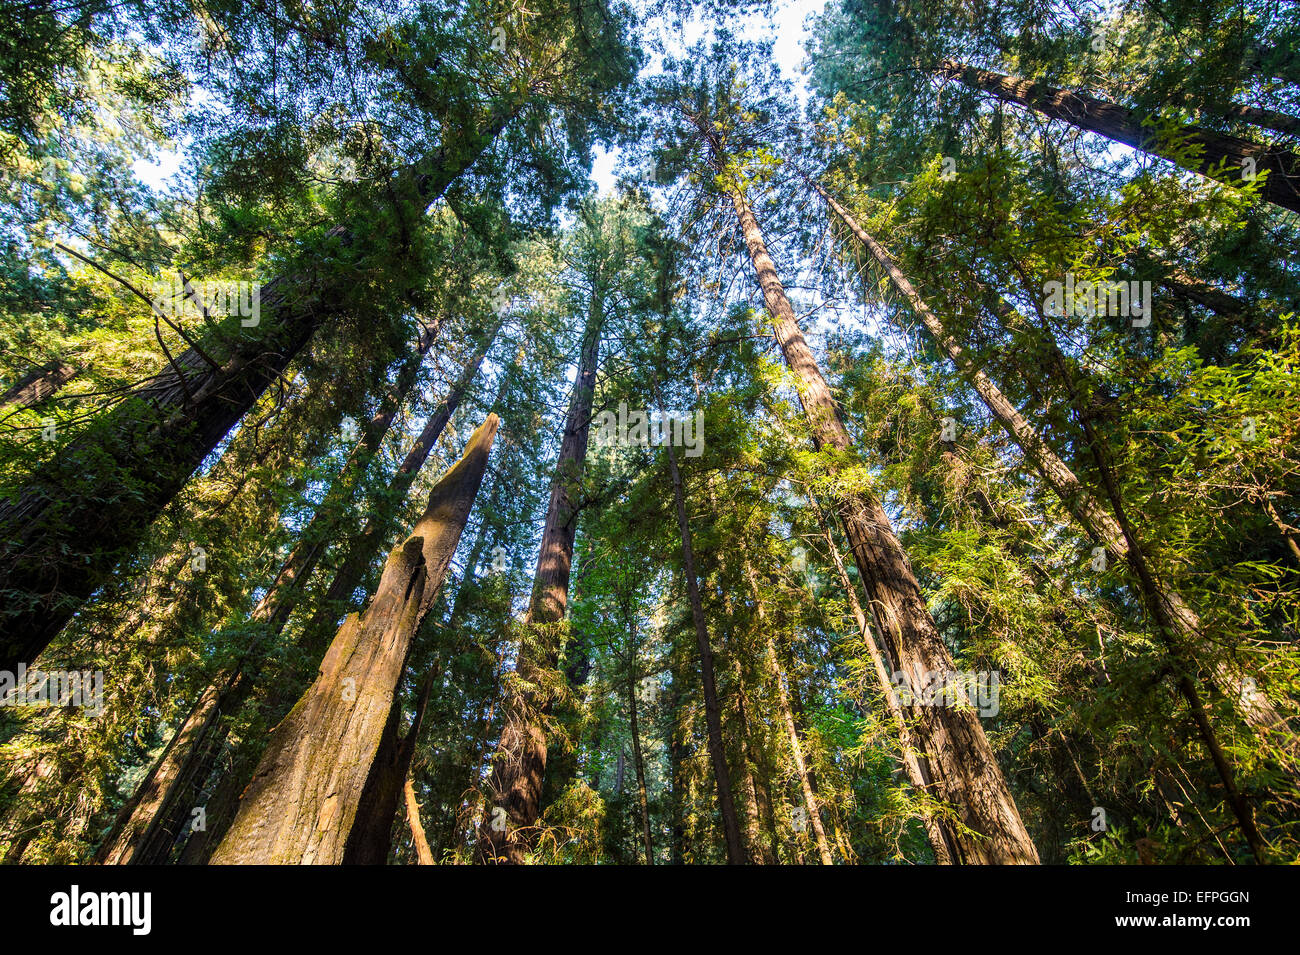 The treetops of the Redwood trees in the Avenue of the Giants, Northern California, USA Stock Photo